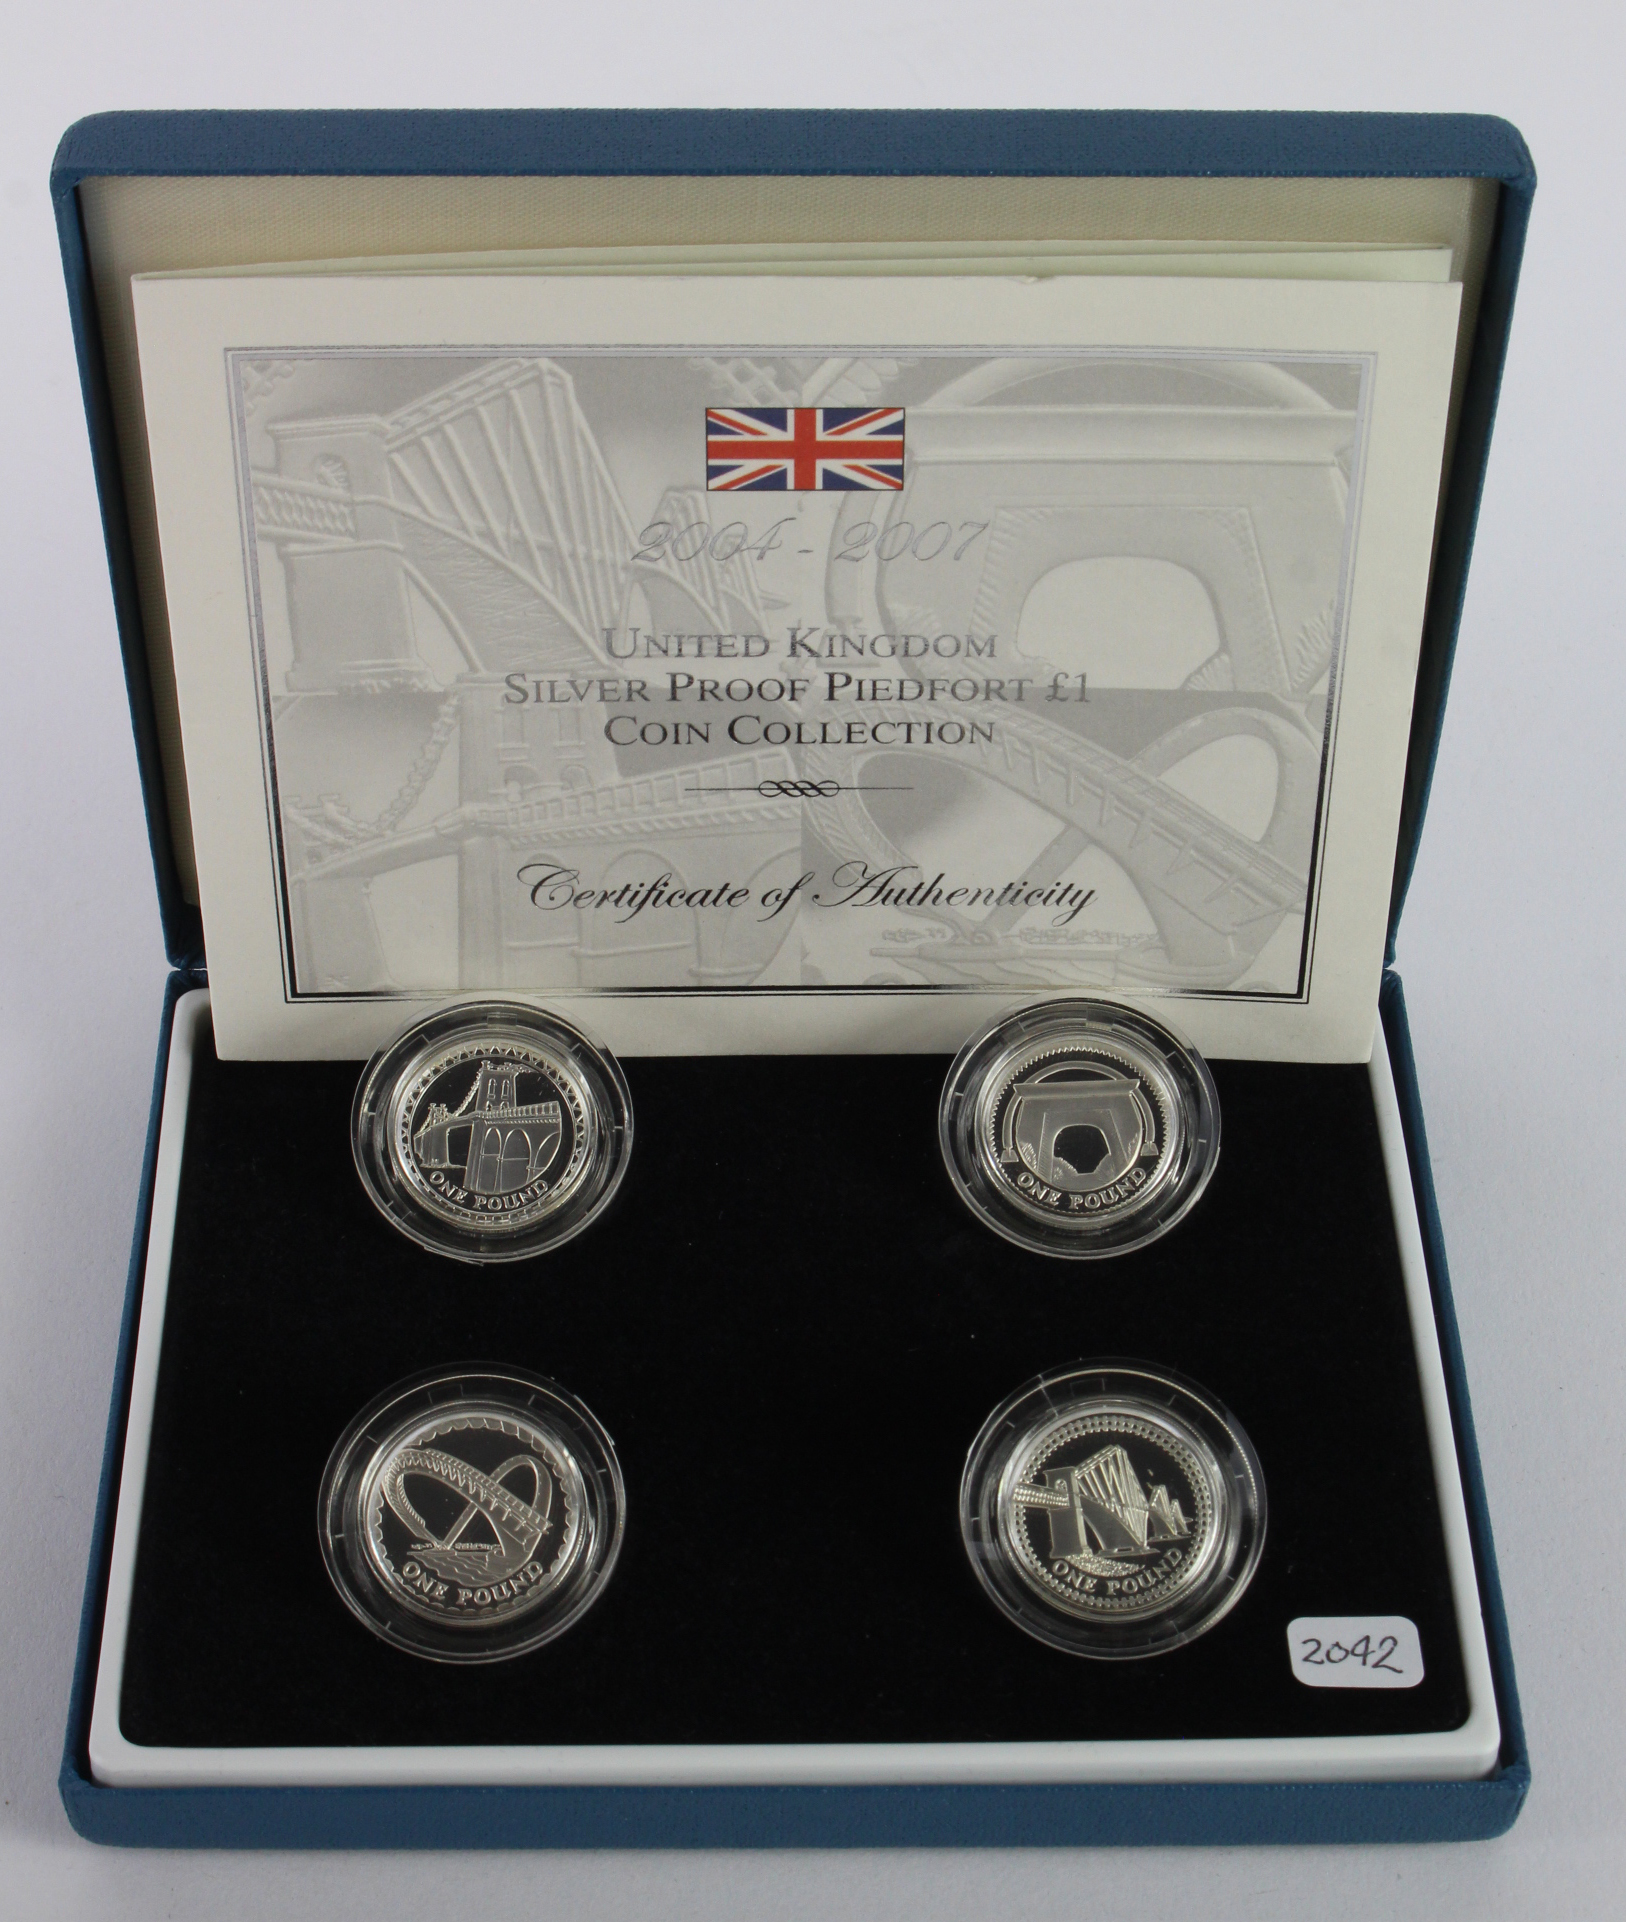 One Pound Silver Proof piedfort four coin set 2004 - 2007 "Bridges" FDC boxed as issued